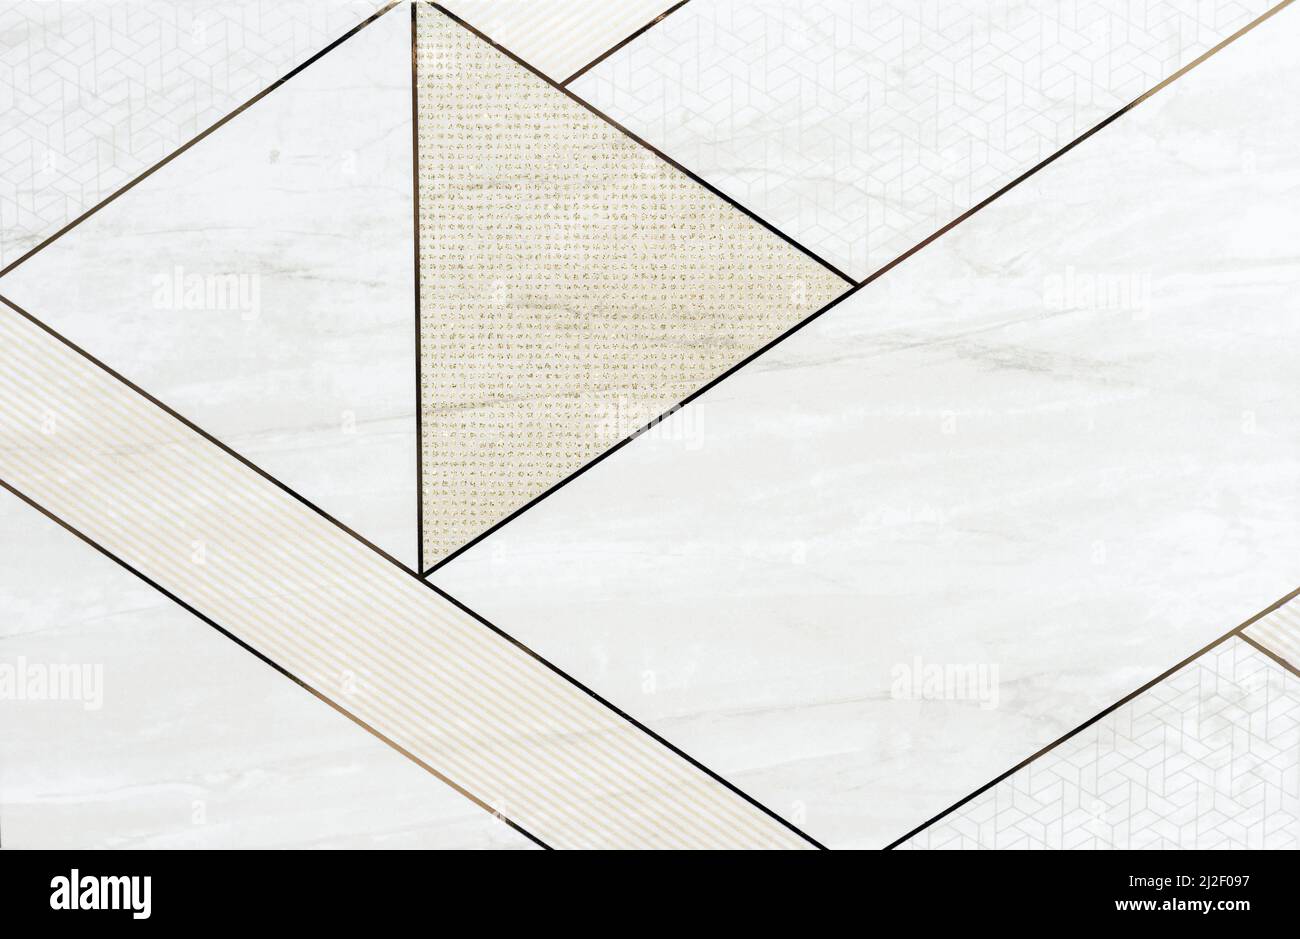 Ceramic tiles with geometric patterns and marble texture. Stock Photo